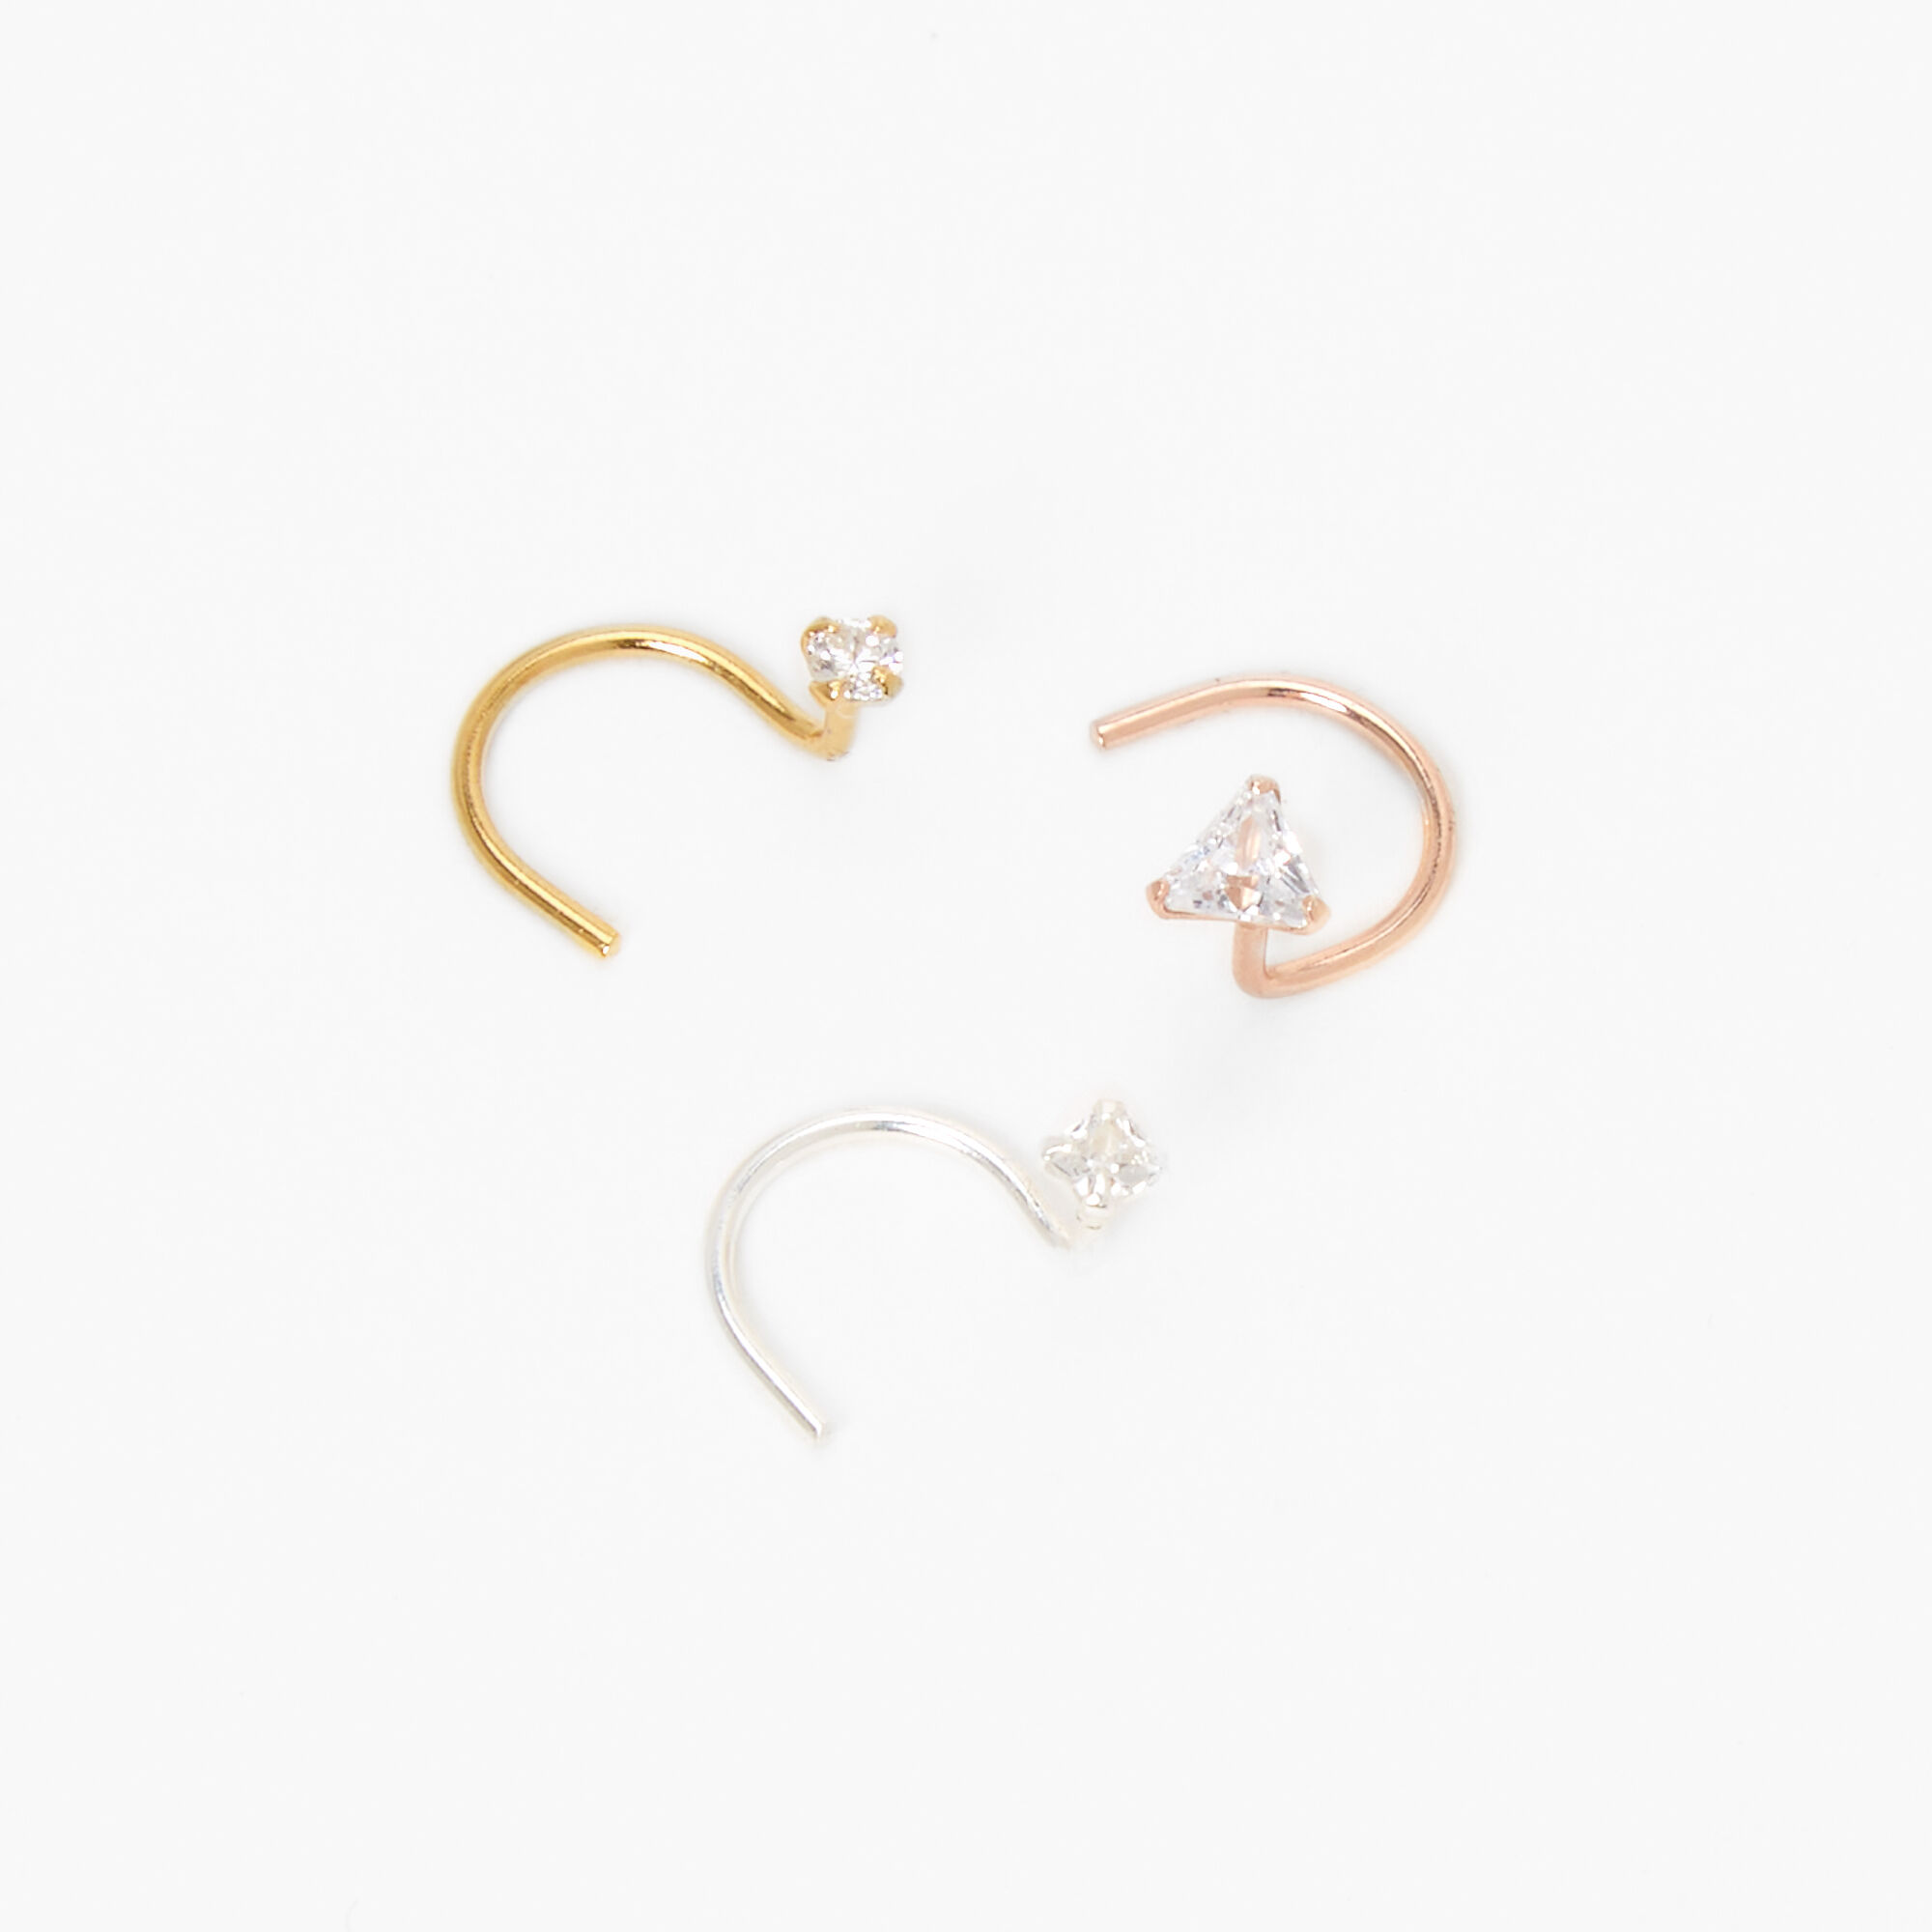 Body Candy Nose Hoops in 18k Gold 20 Gauge 516